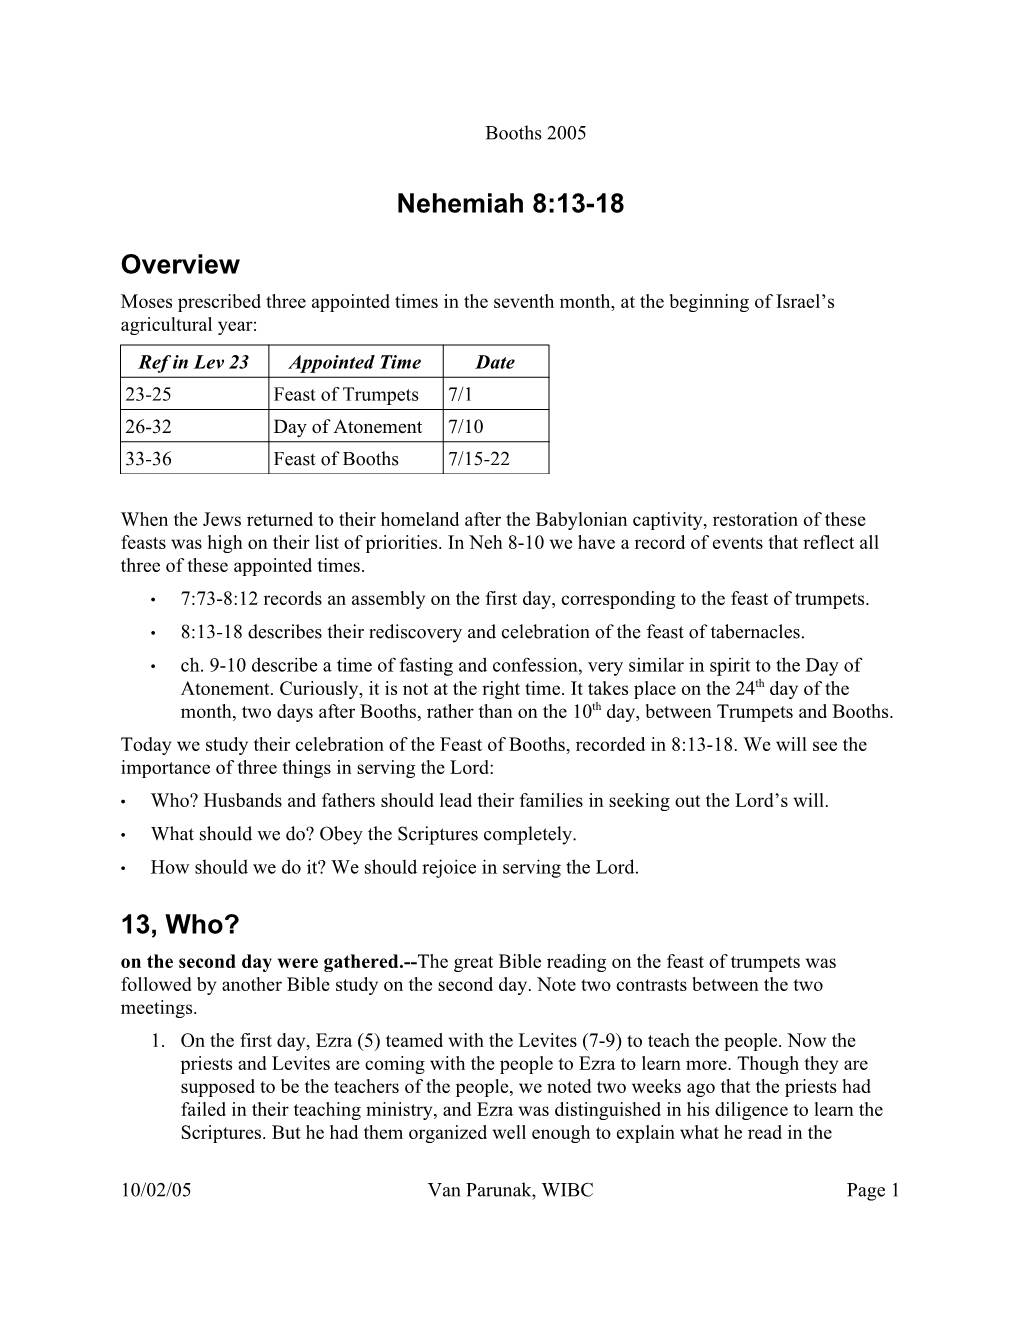 Nehemiah 8:13-18 Overview 13, Who?